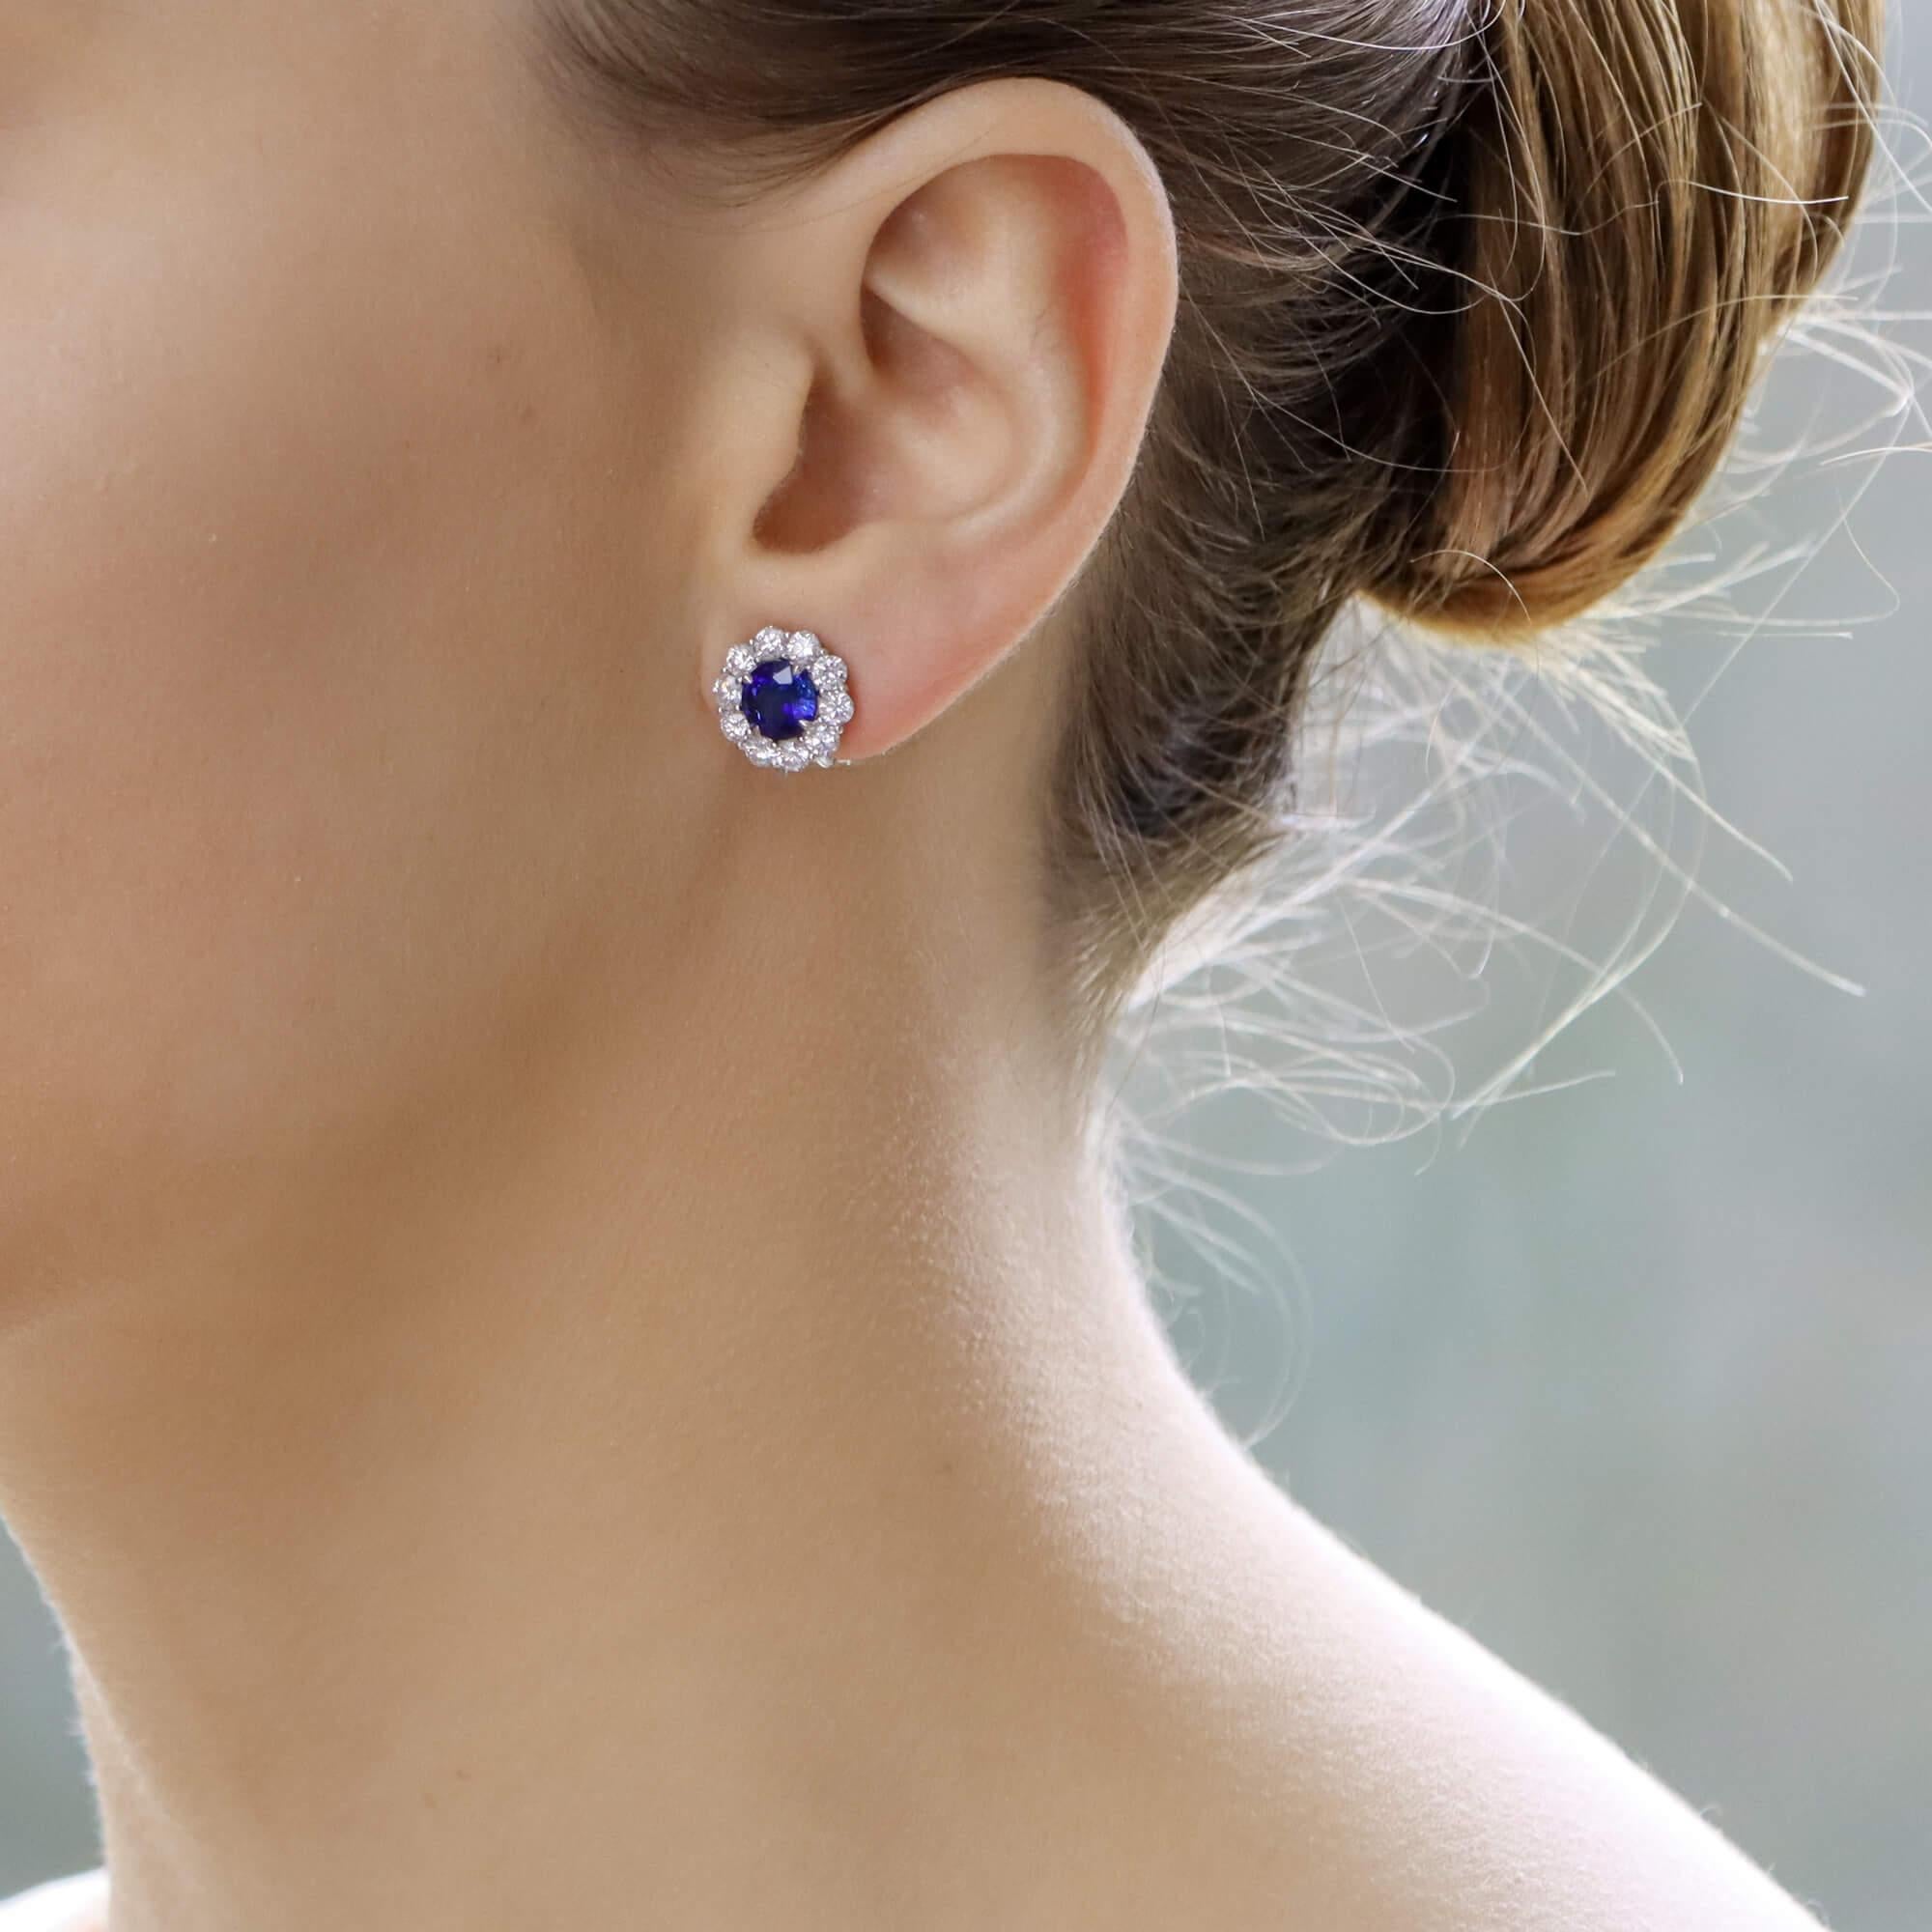 An elegant pair of sapphire and diamond ear studs set in platinum. Gorgeous round natural Burmese sapphires totalling 2.64cts surrounded by a border of fine quality sparkly round brilliant cut diamonds totalling 1.65cts. 

These earrings are